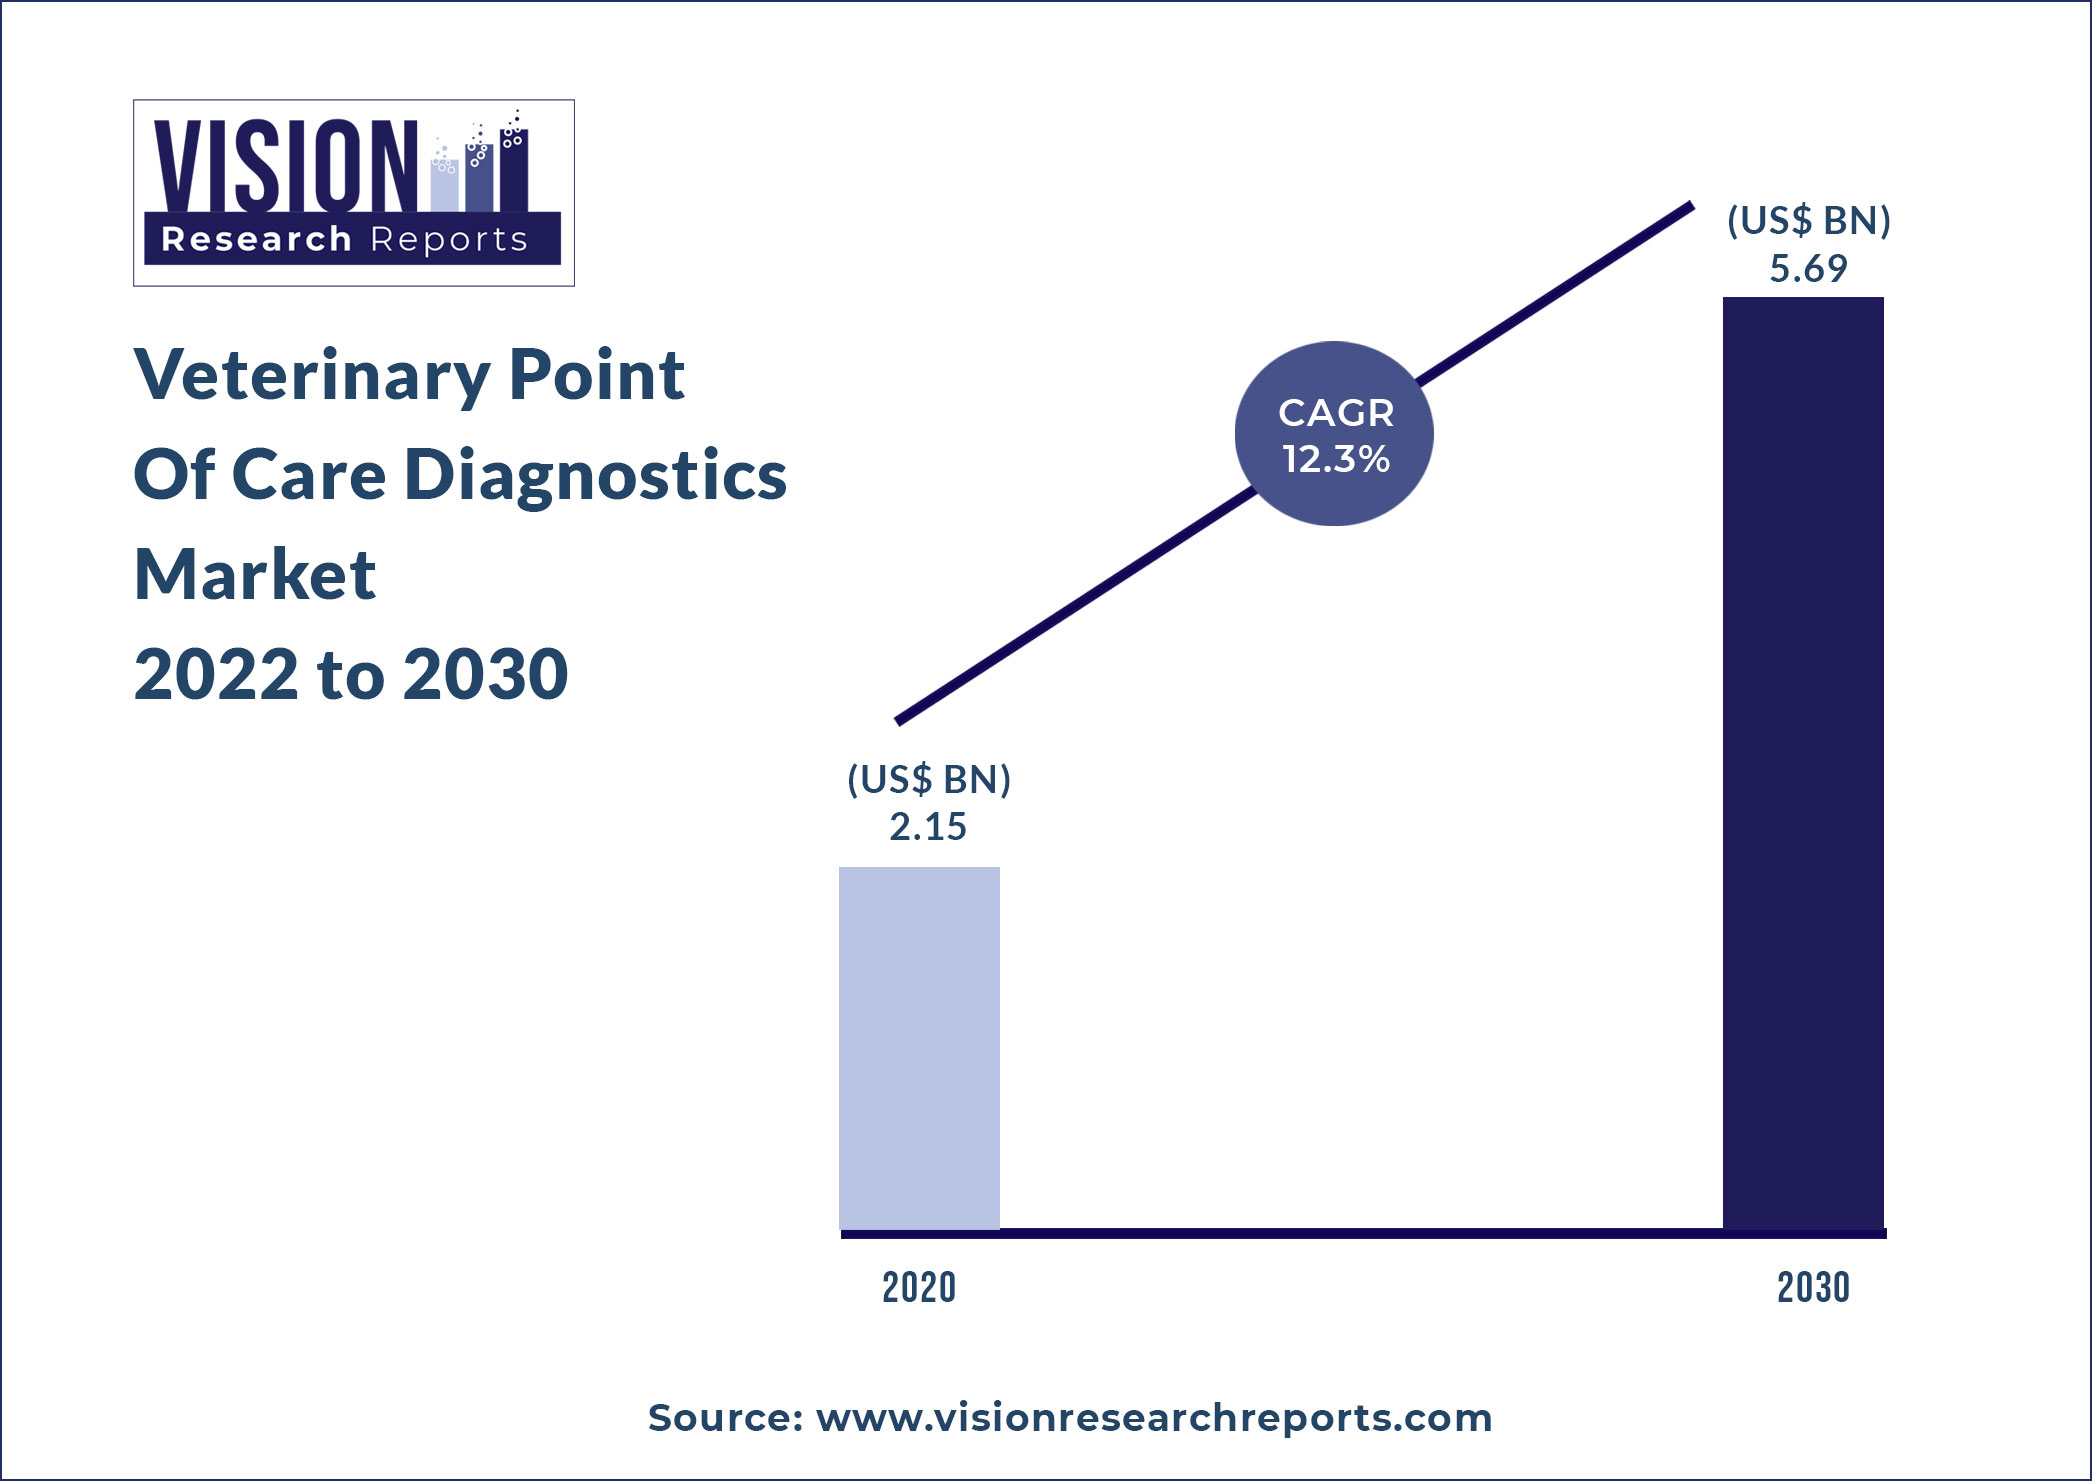 Veterinary Point Of Care Diagnostics Market Size 2022 to 2030